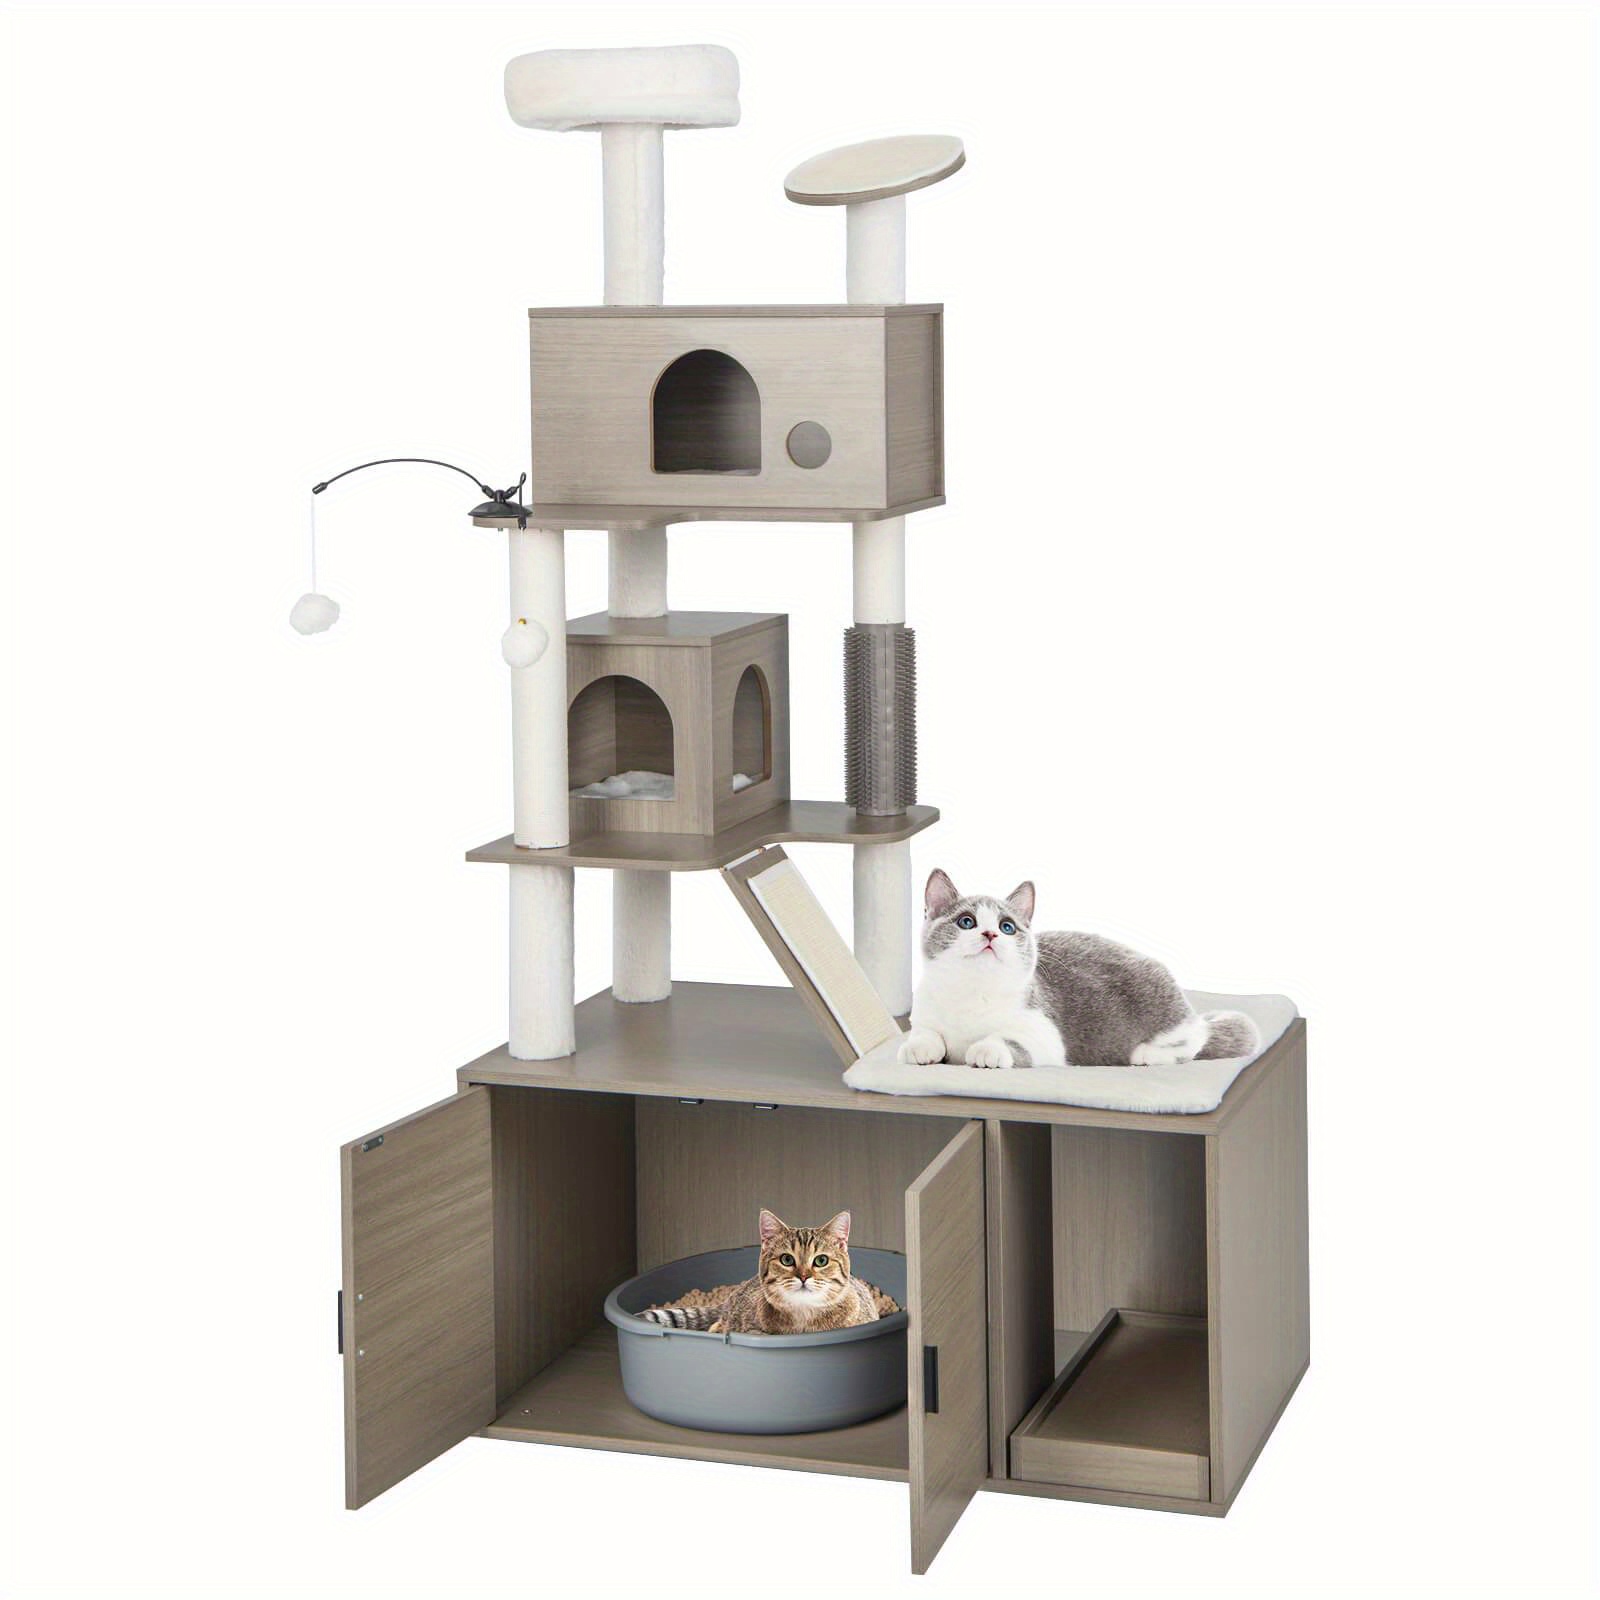 

Costway Cat Tree With Litter Box Enclosure 2-in-1 Modern Cat Tower With Double Condos